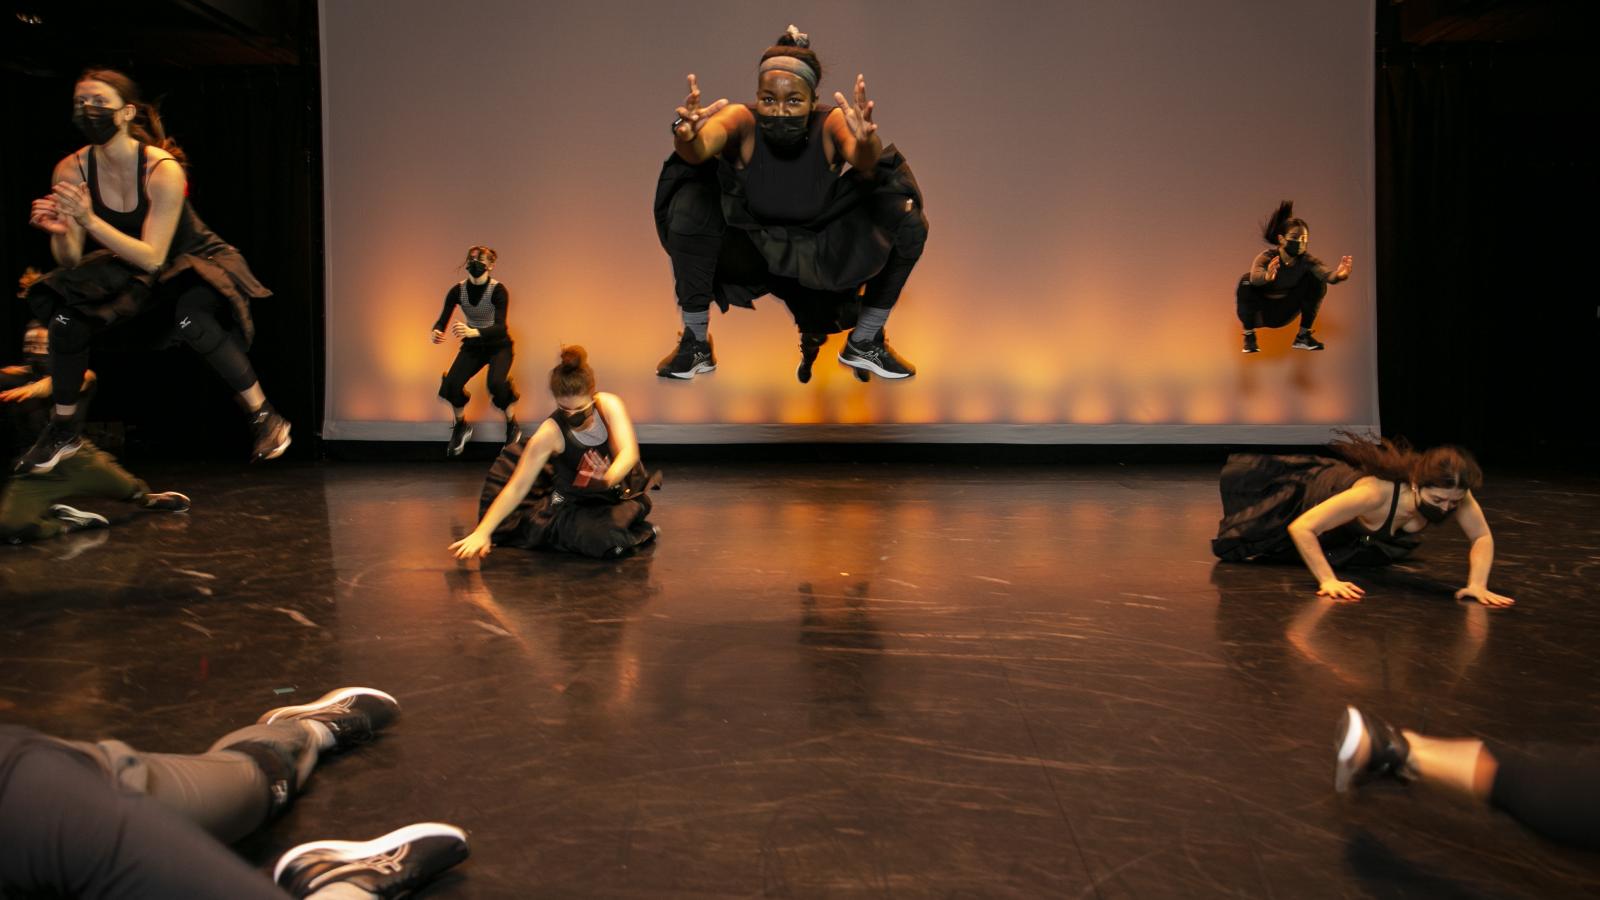 Dancers performing on a stage